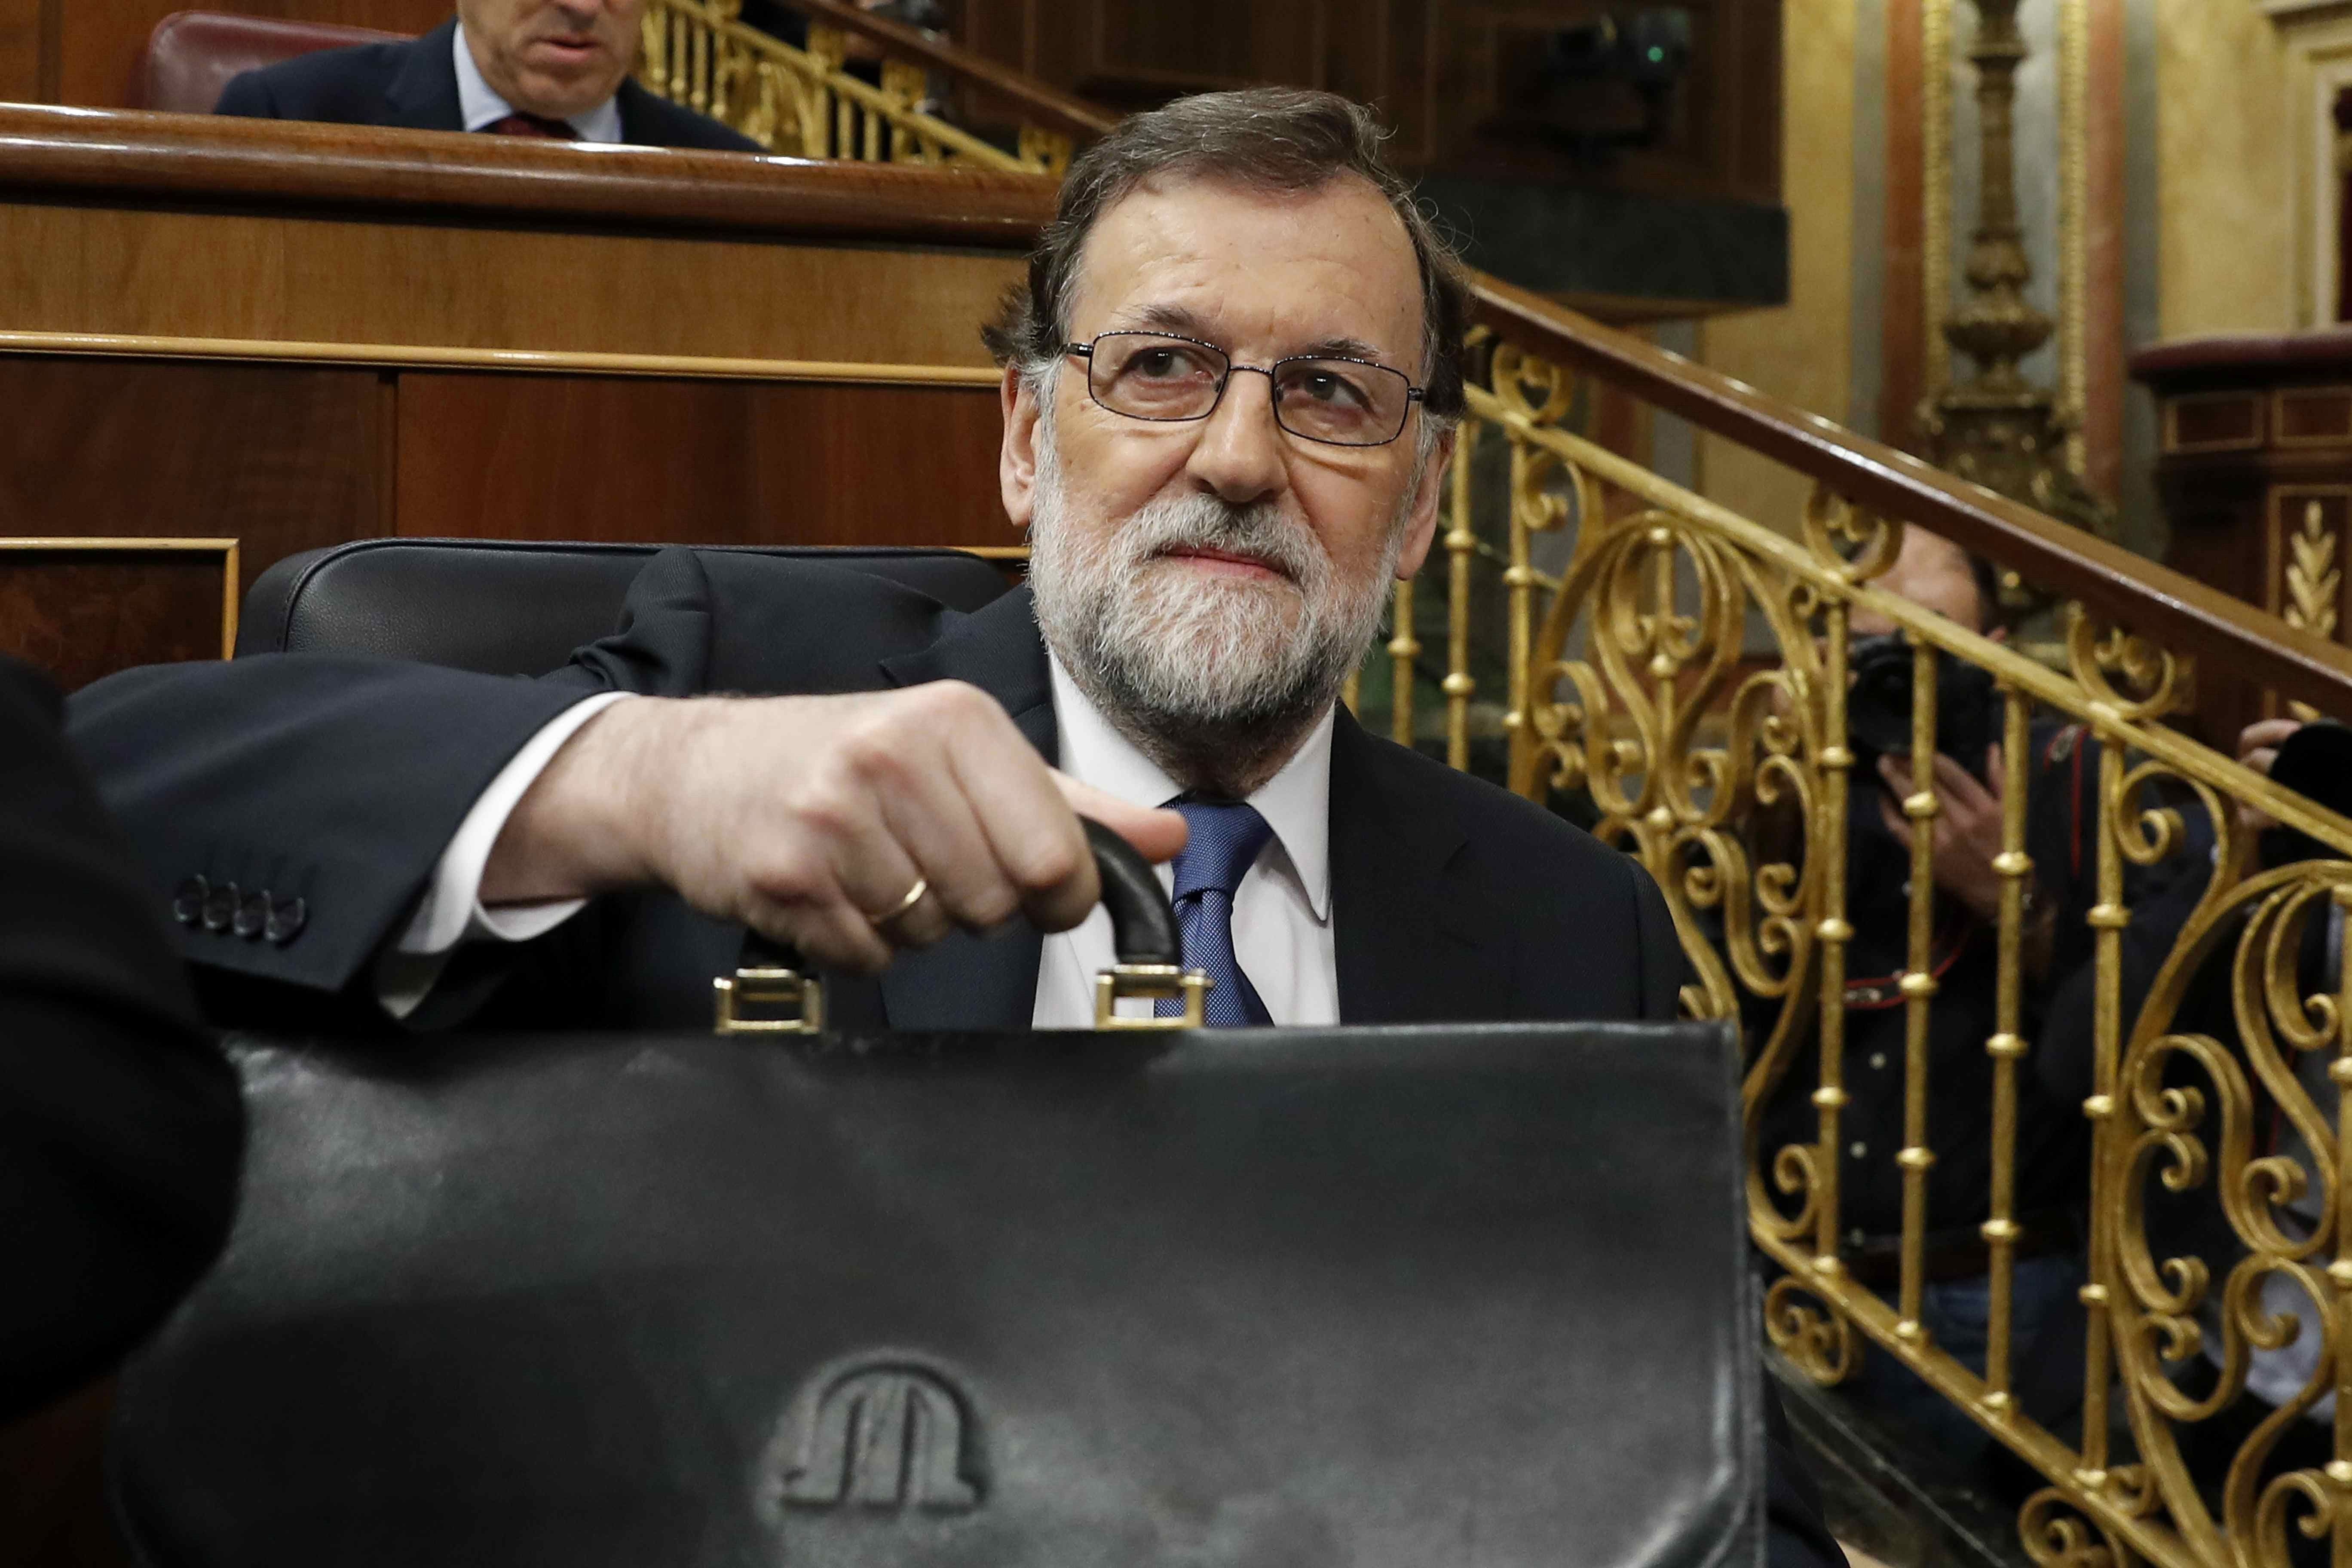 Hard-hitting editorial in The Times tells Rajoy to refrain, again